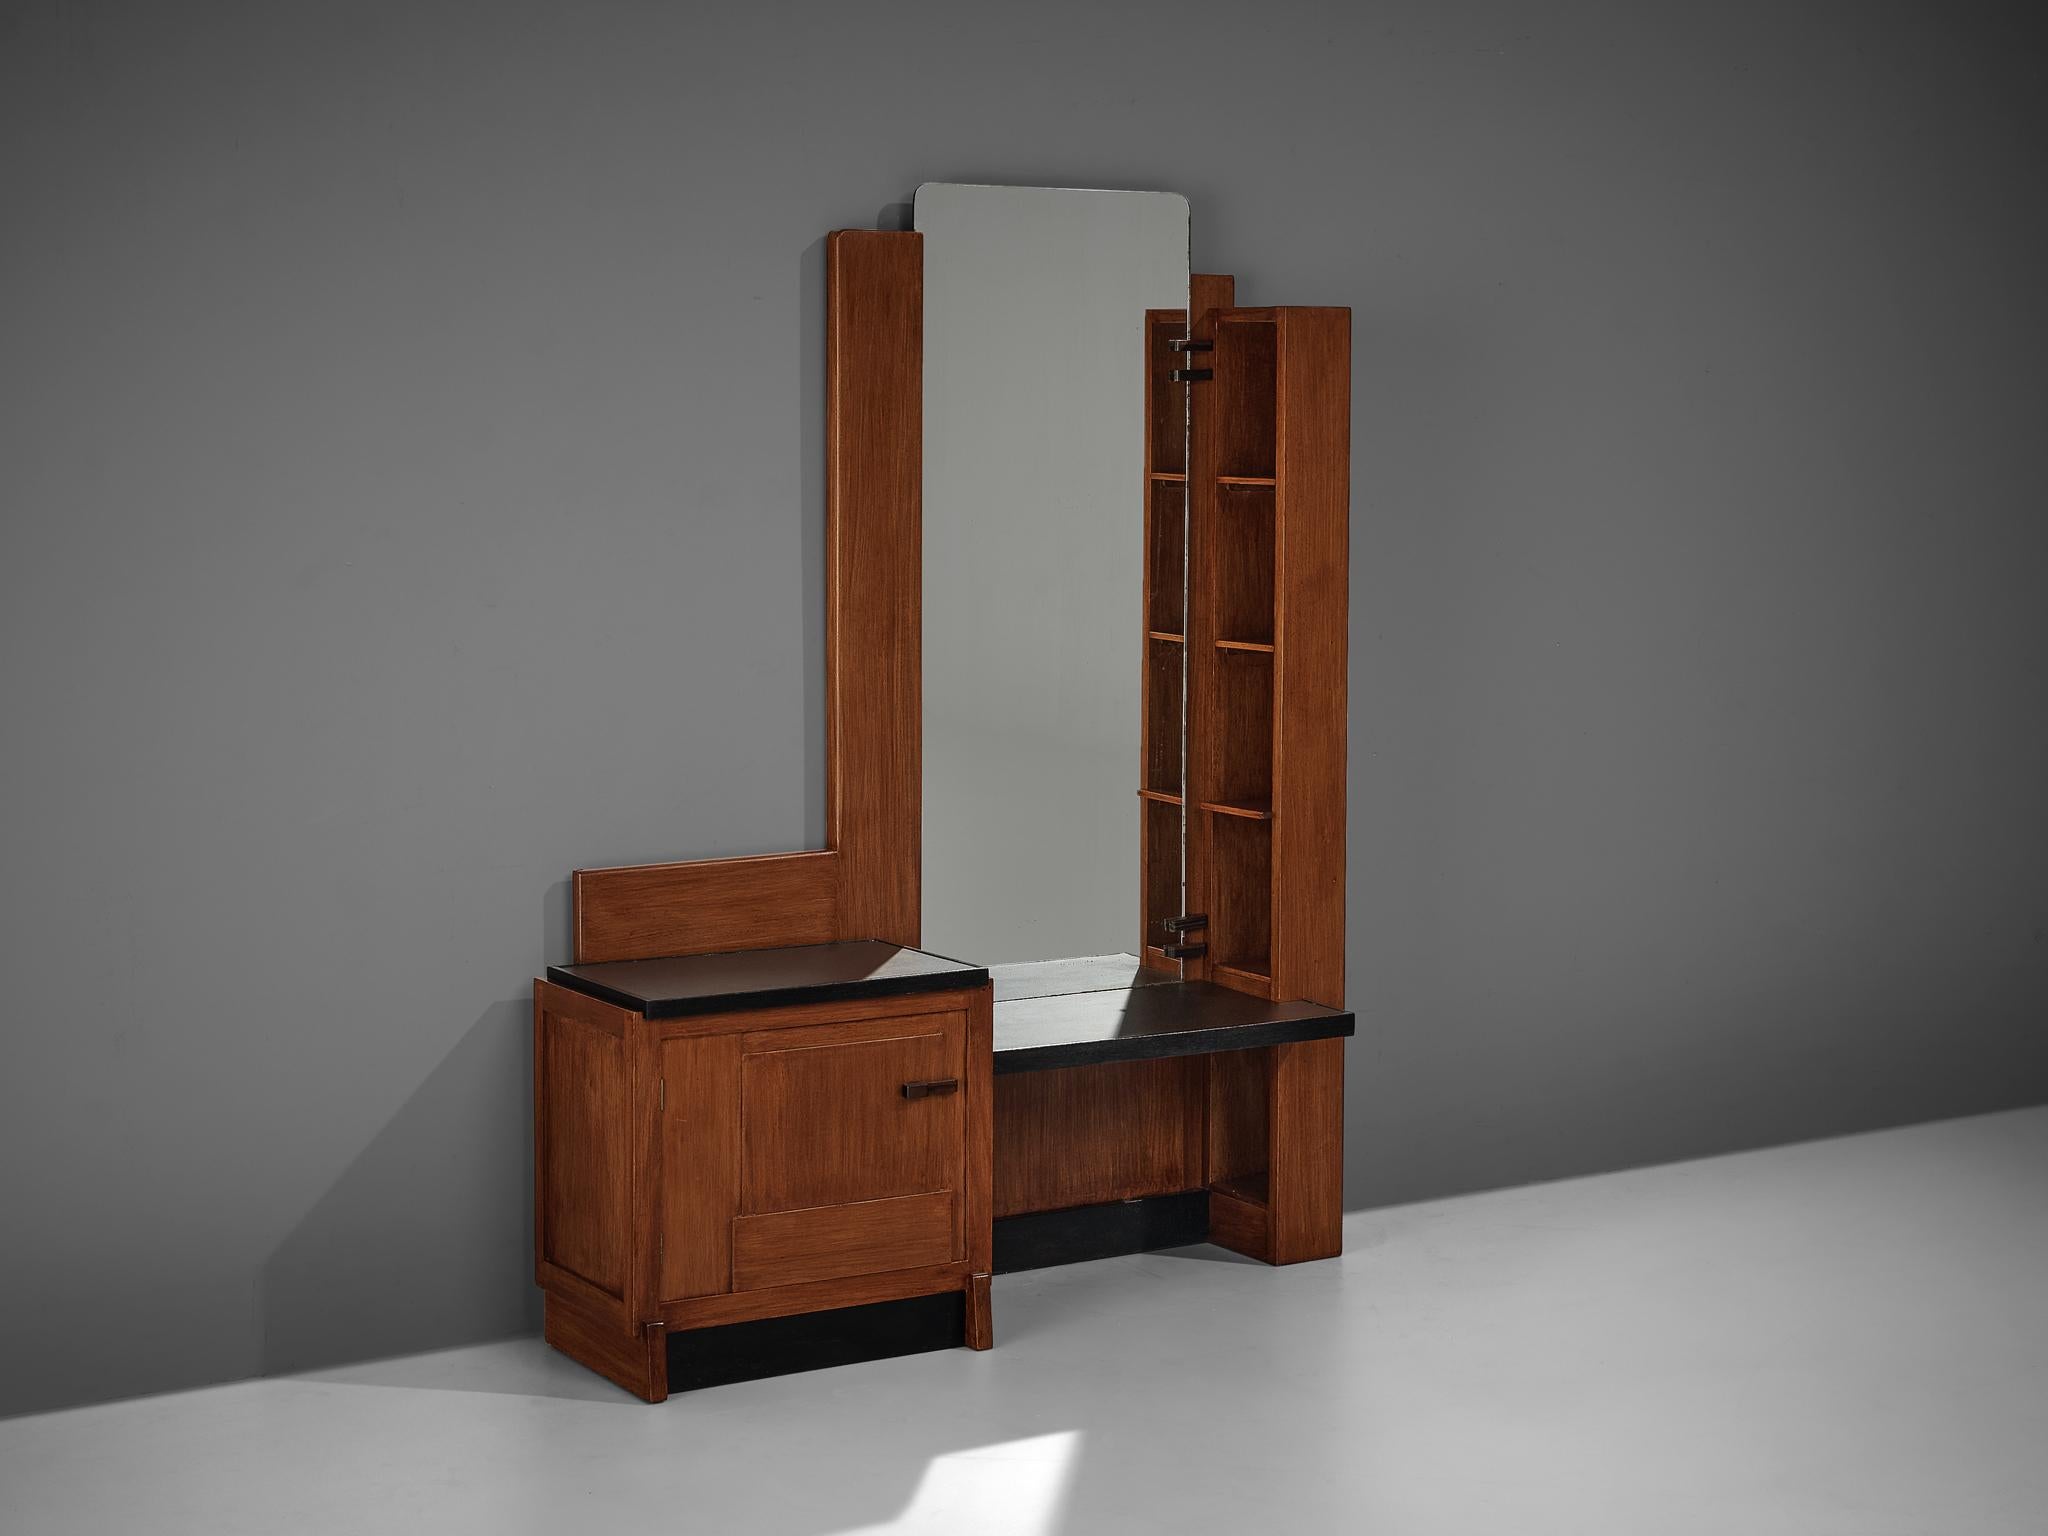 Attributed to Jan Brunott, dressing table, macassar ebony, mahogany, glass, The Netherlands, circa 1925
 
A large mirror combined with functional storage space and beautiful forms make this dressing table a remarkable design. Designed circa 1925 and